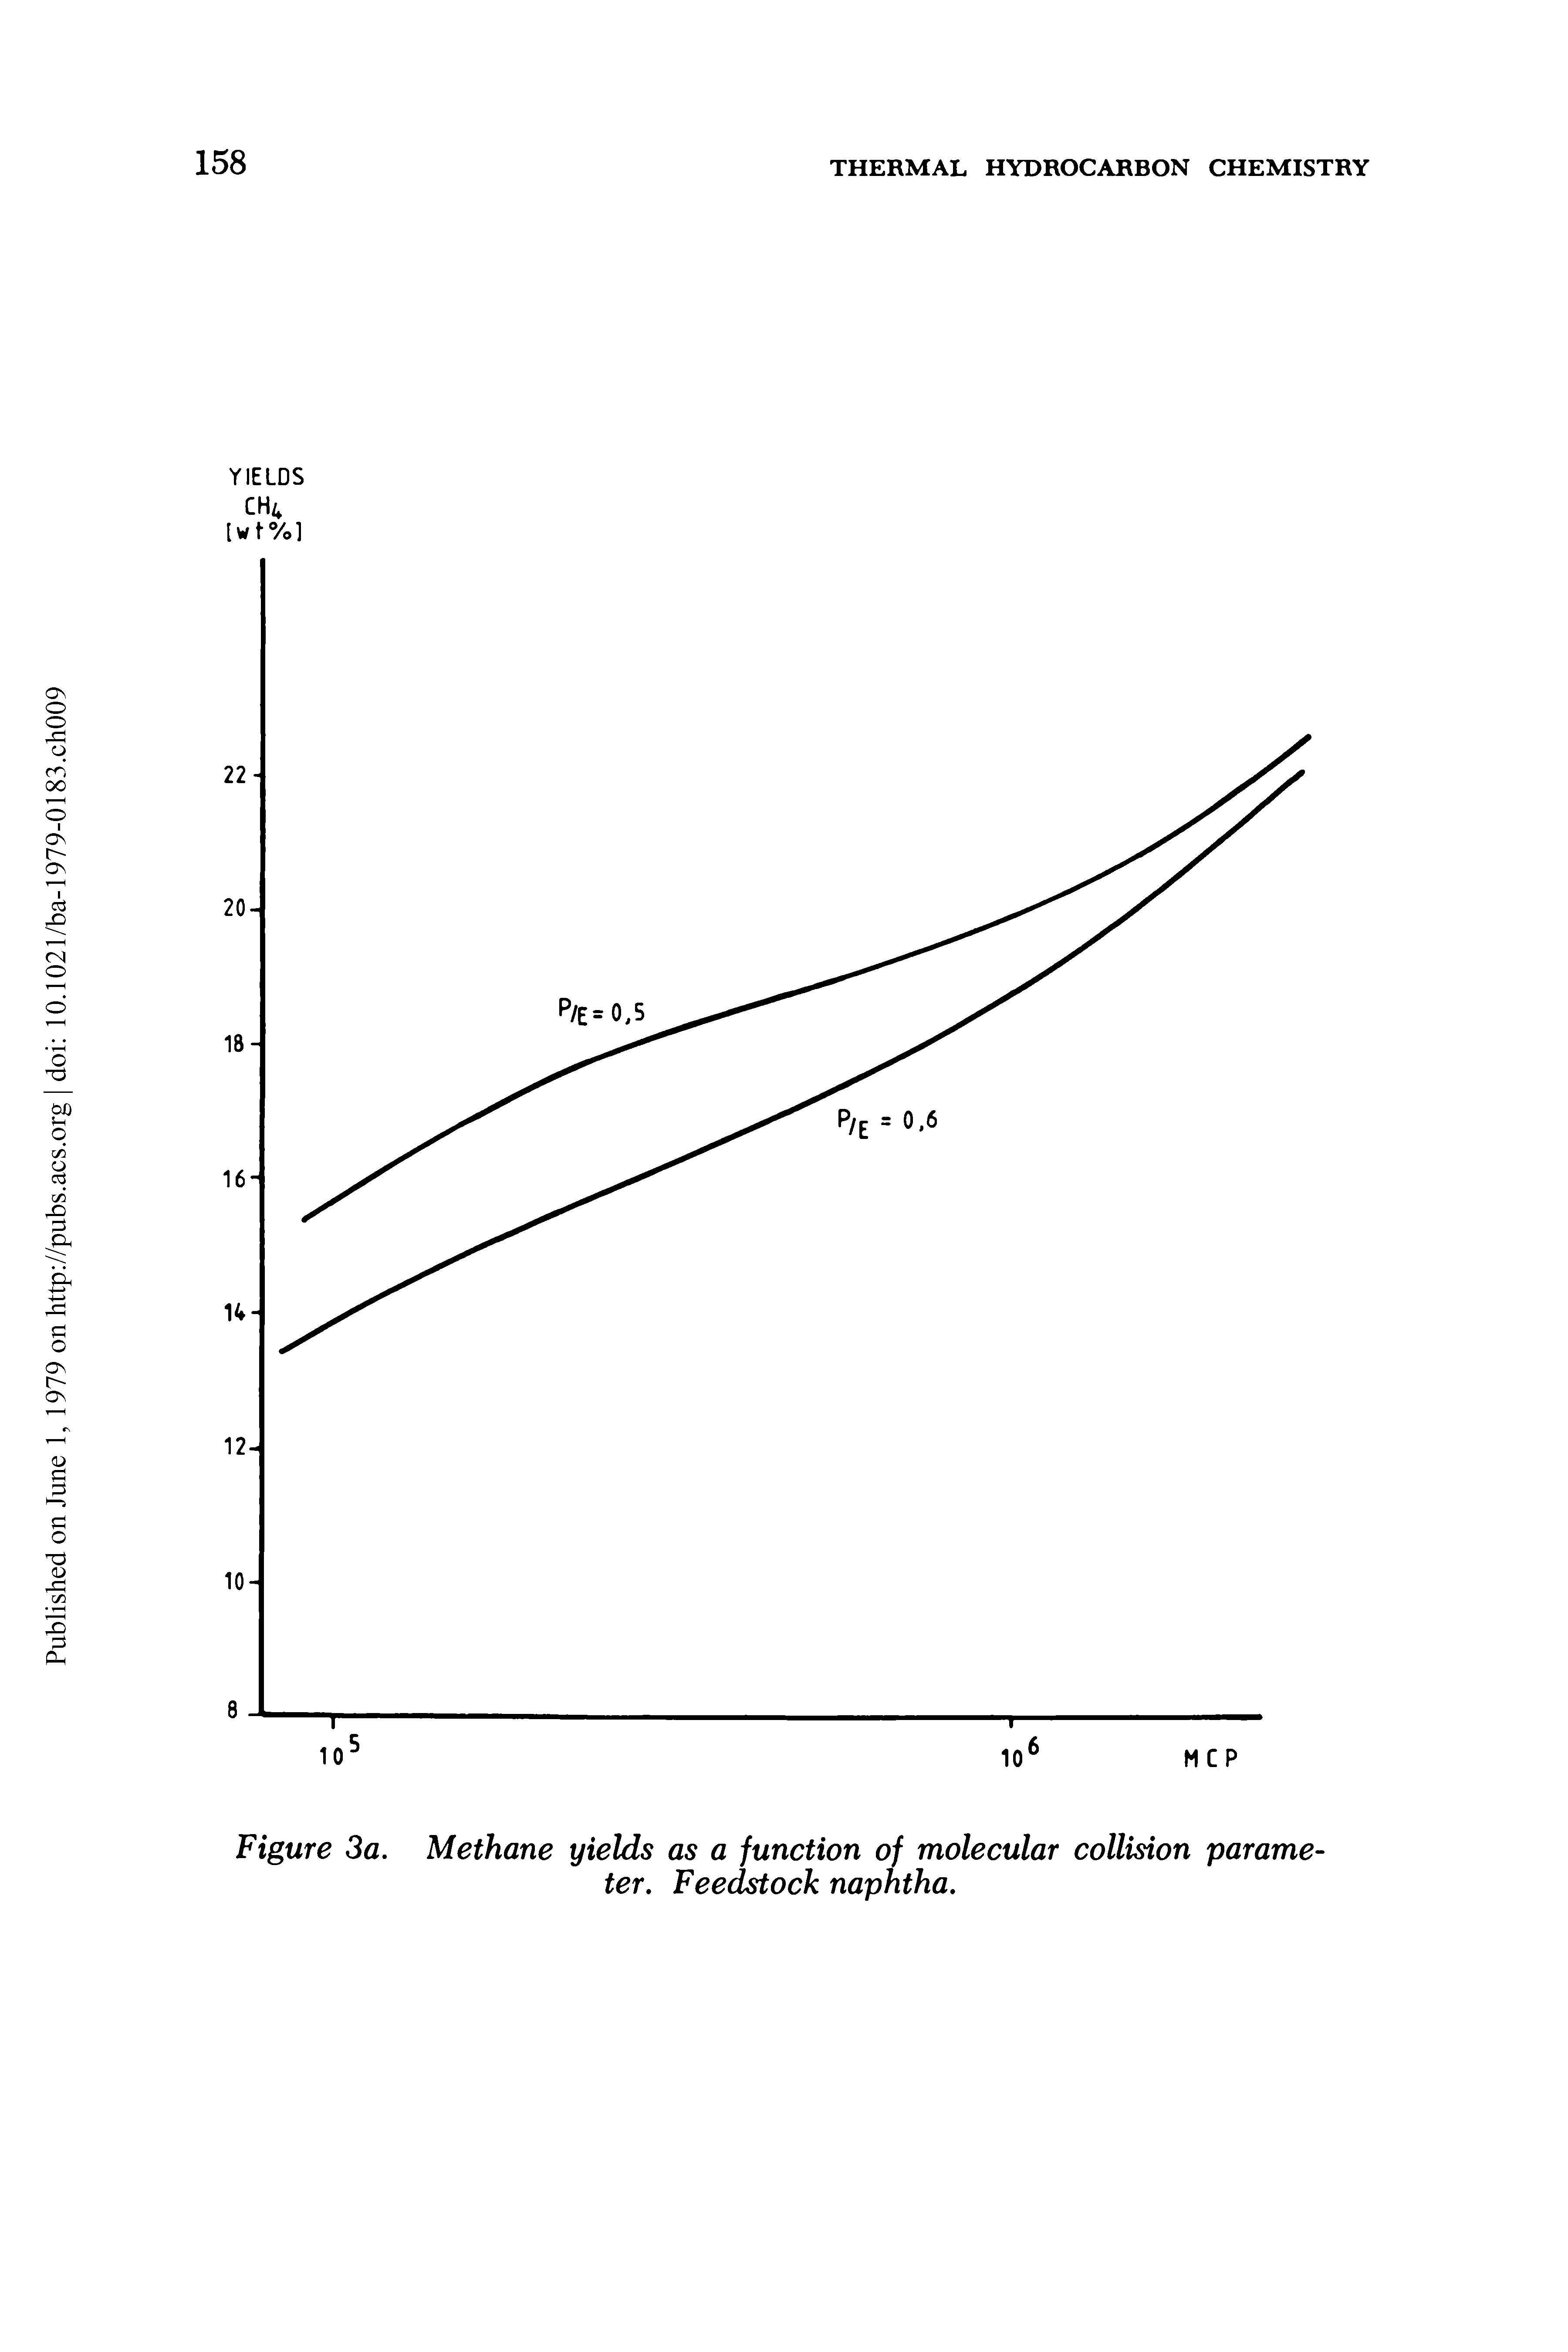 Figure 3a. Methane yields as a function of molecular collision parameter. Feedstock naphtha.